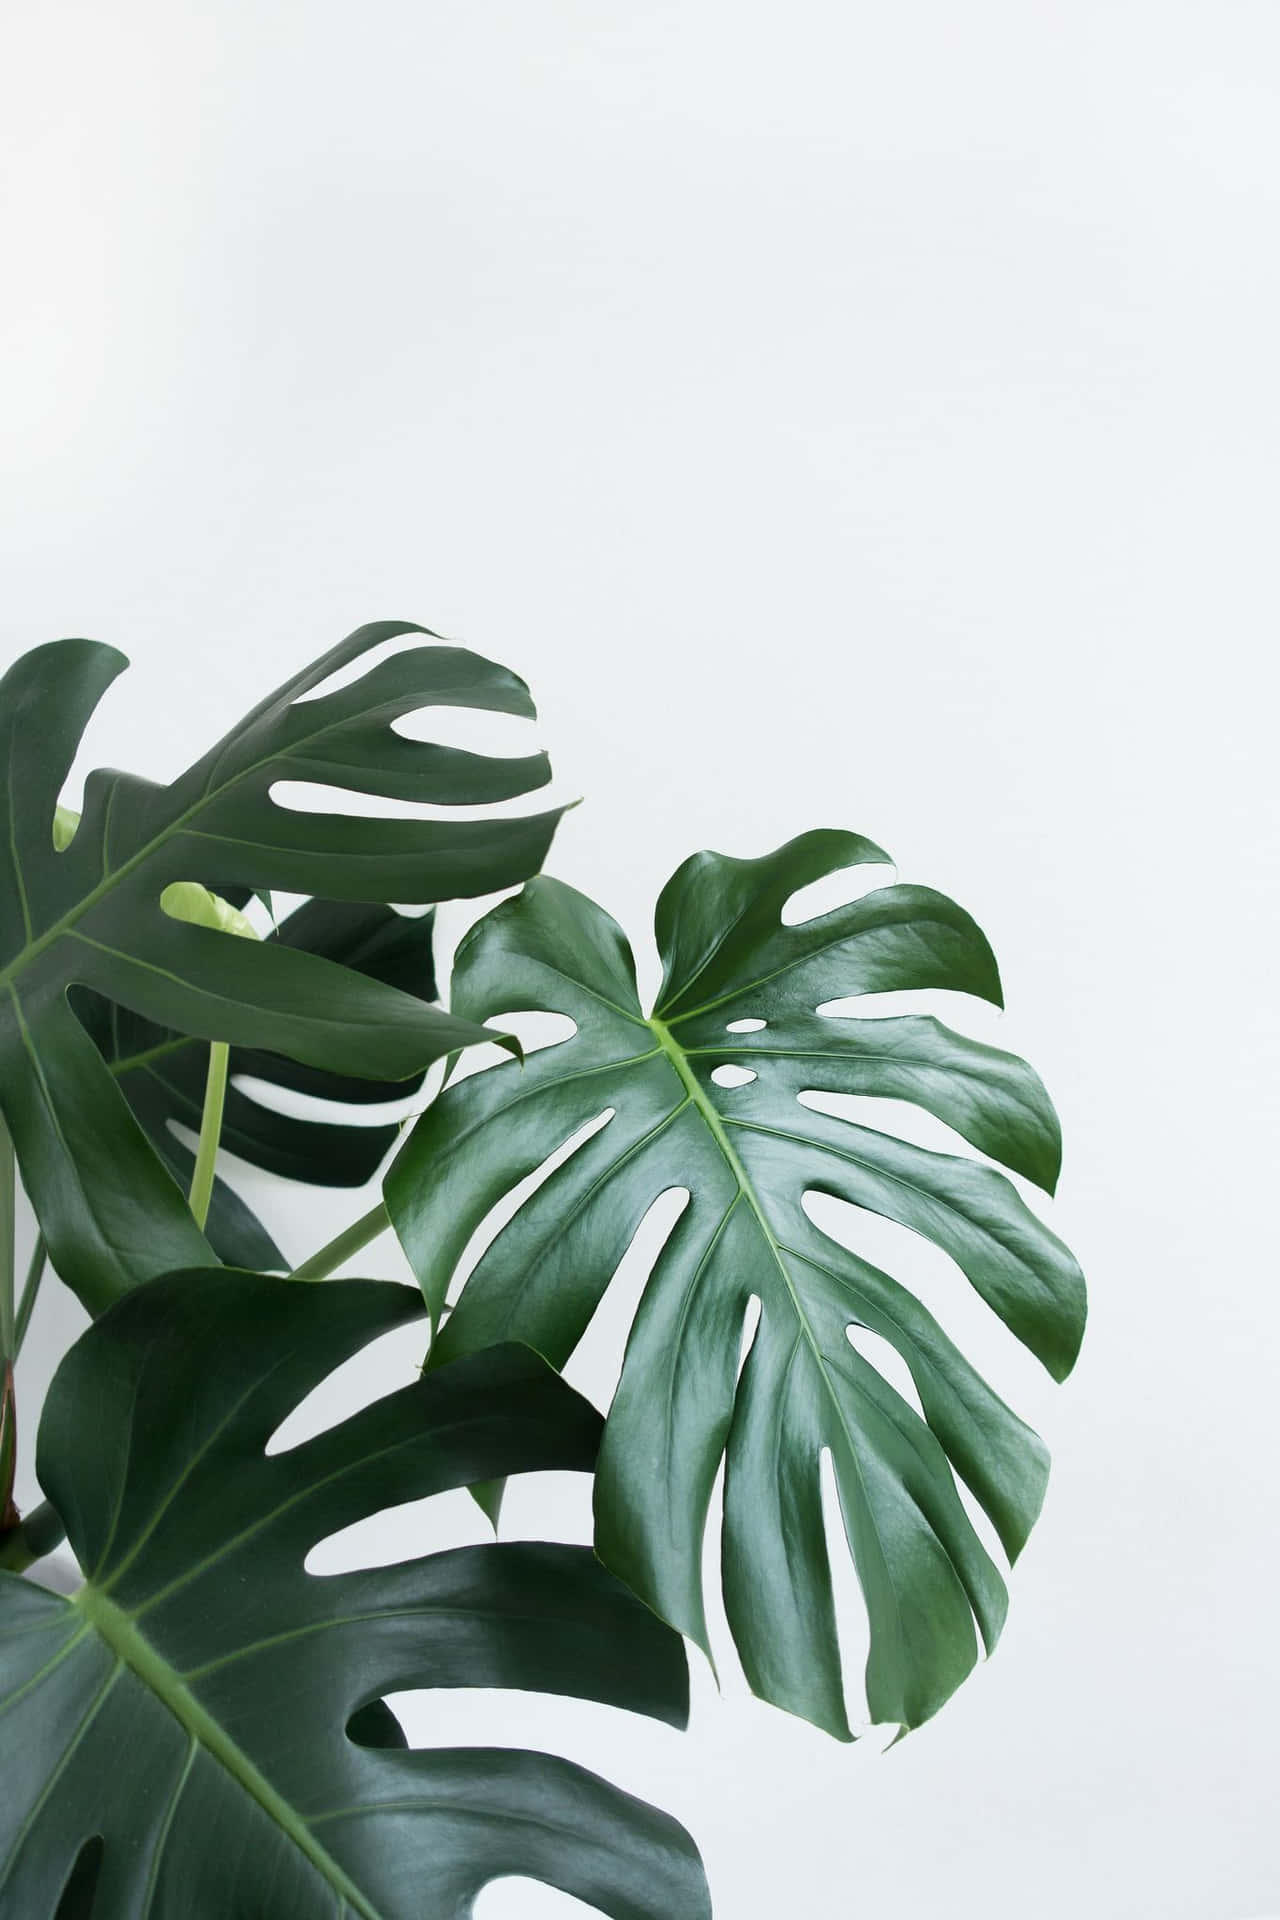 Brighten up your space with this beautiful and simple minimalist plant